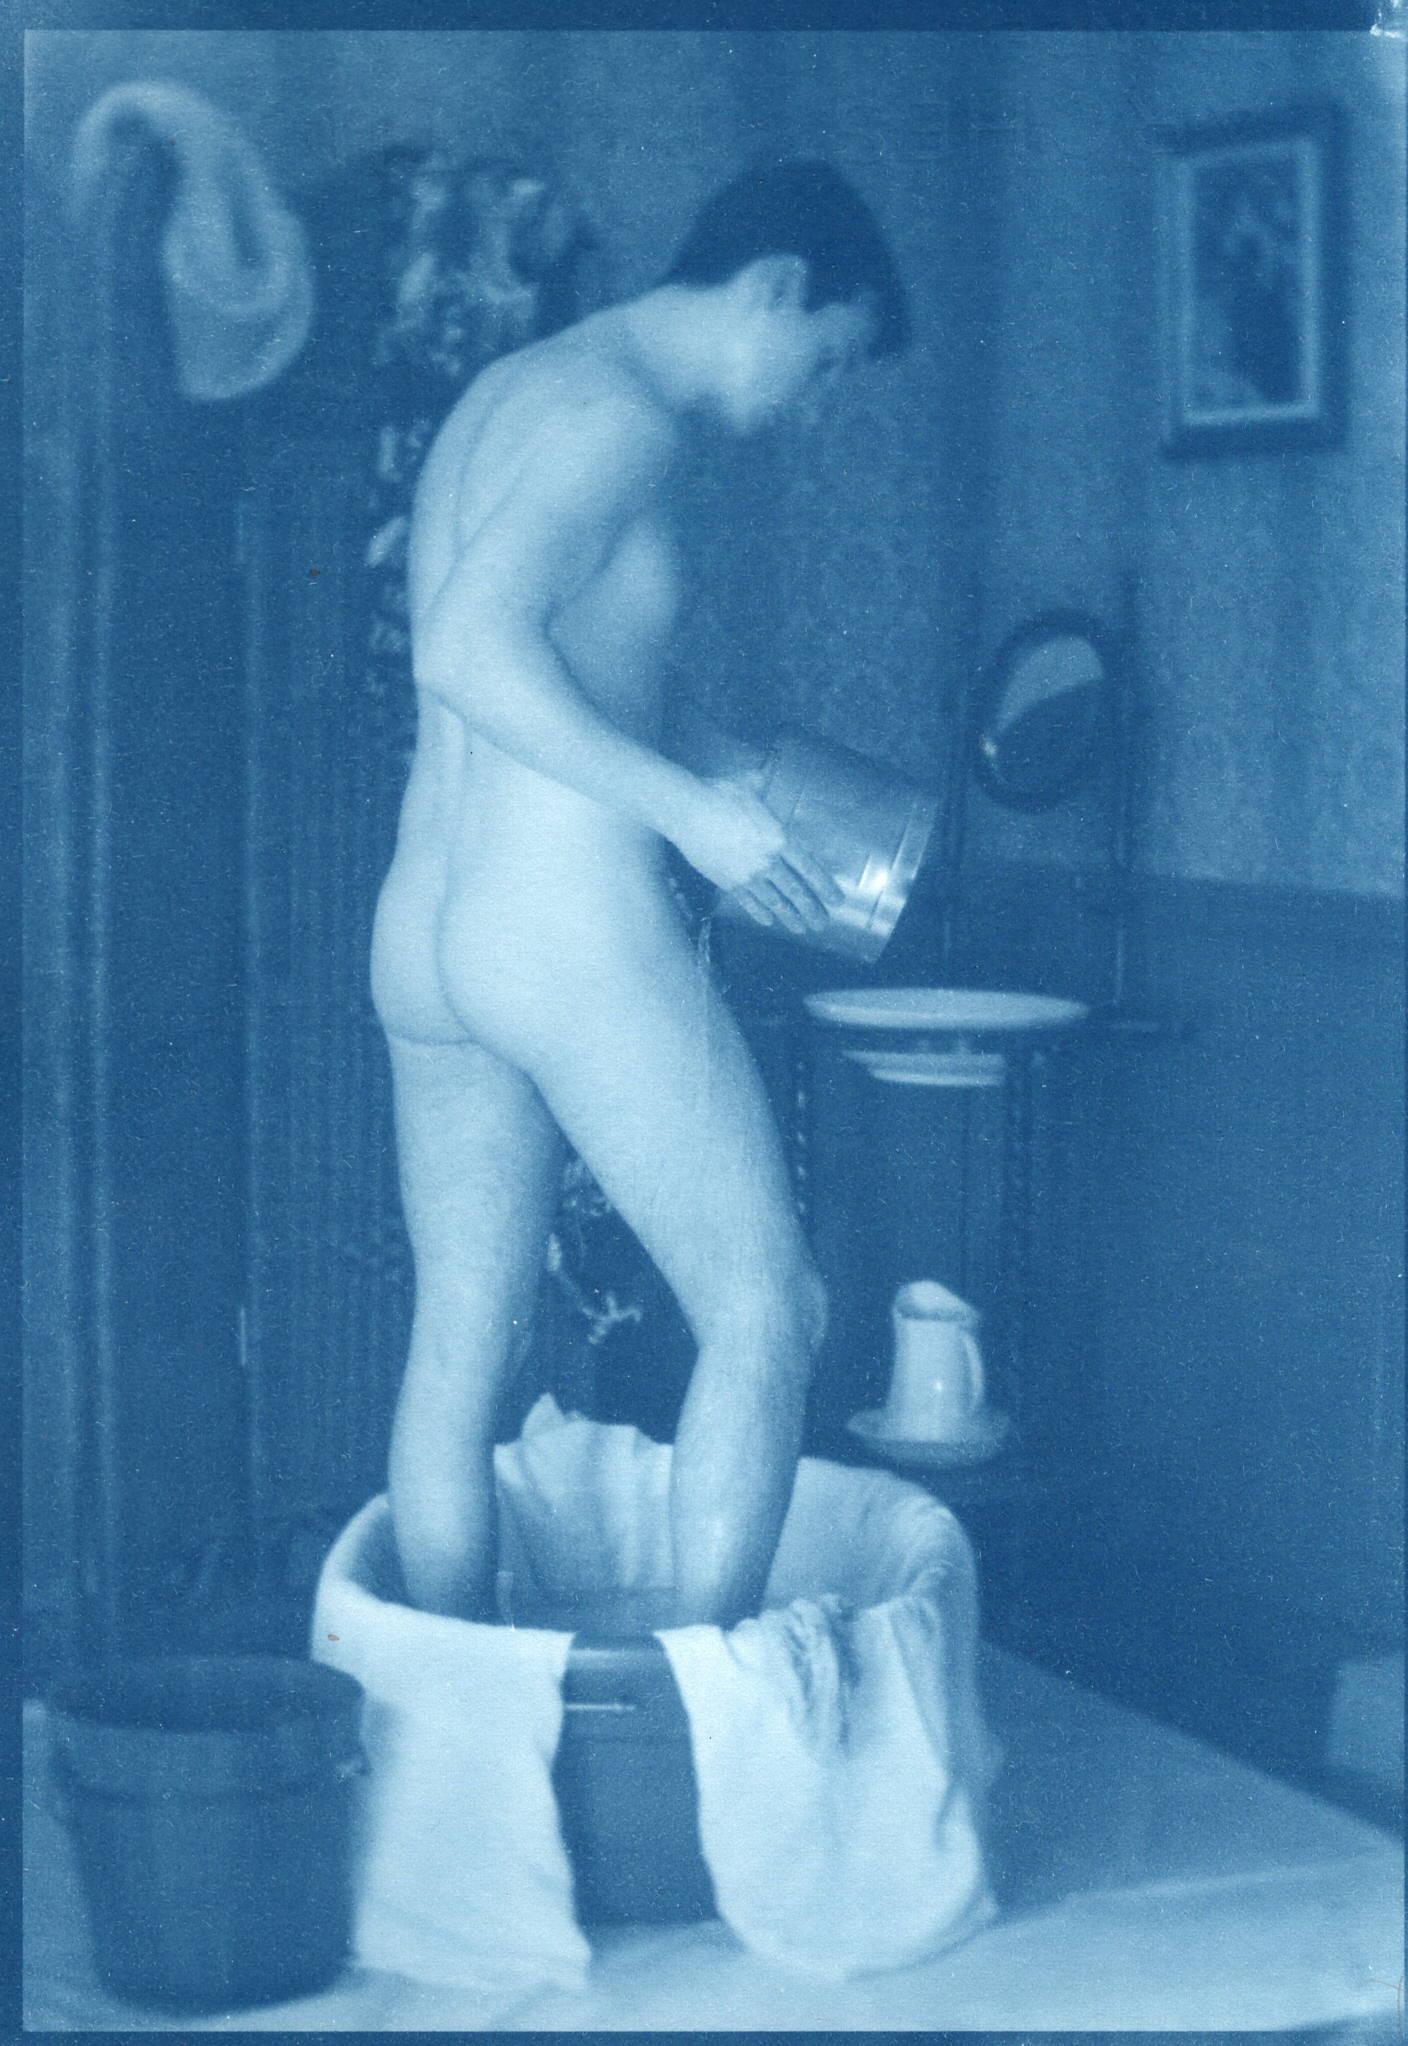 Bather 1 - Photograph by Curtice Taylor